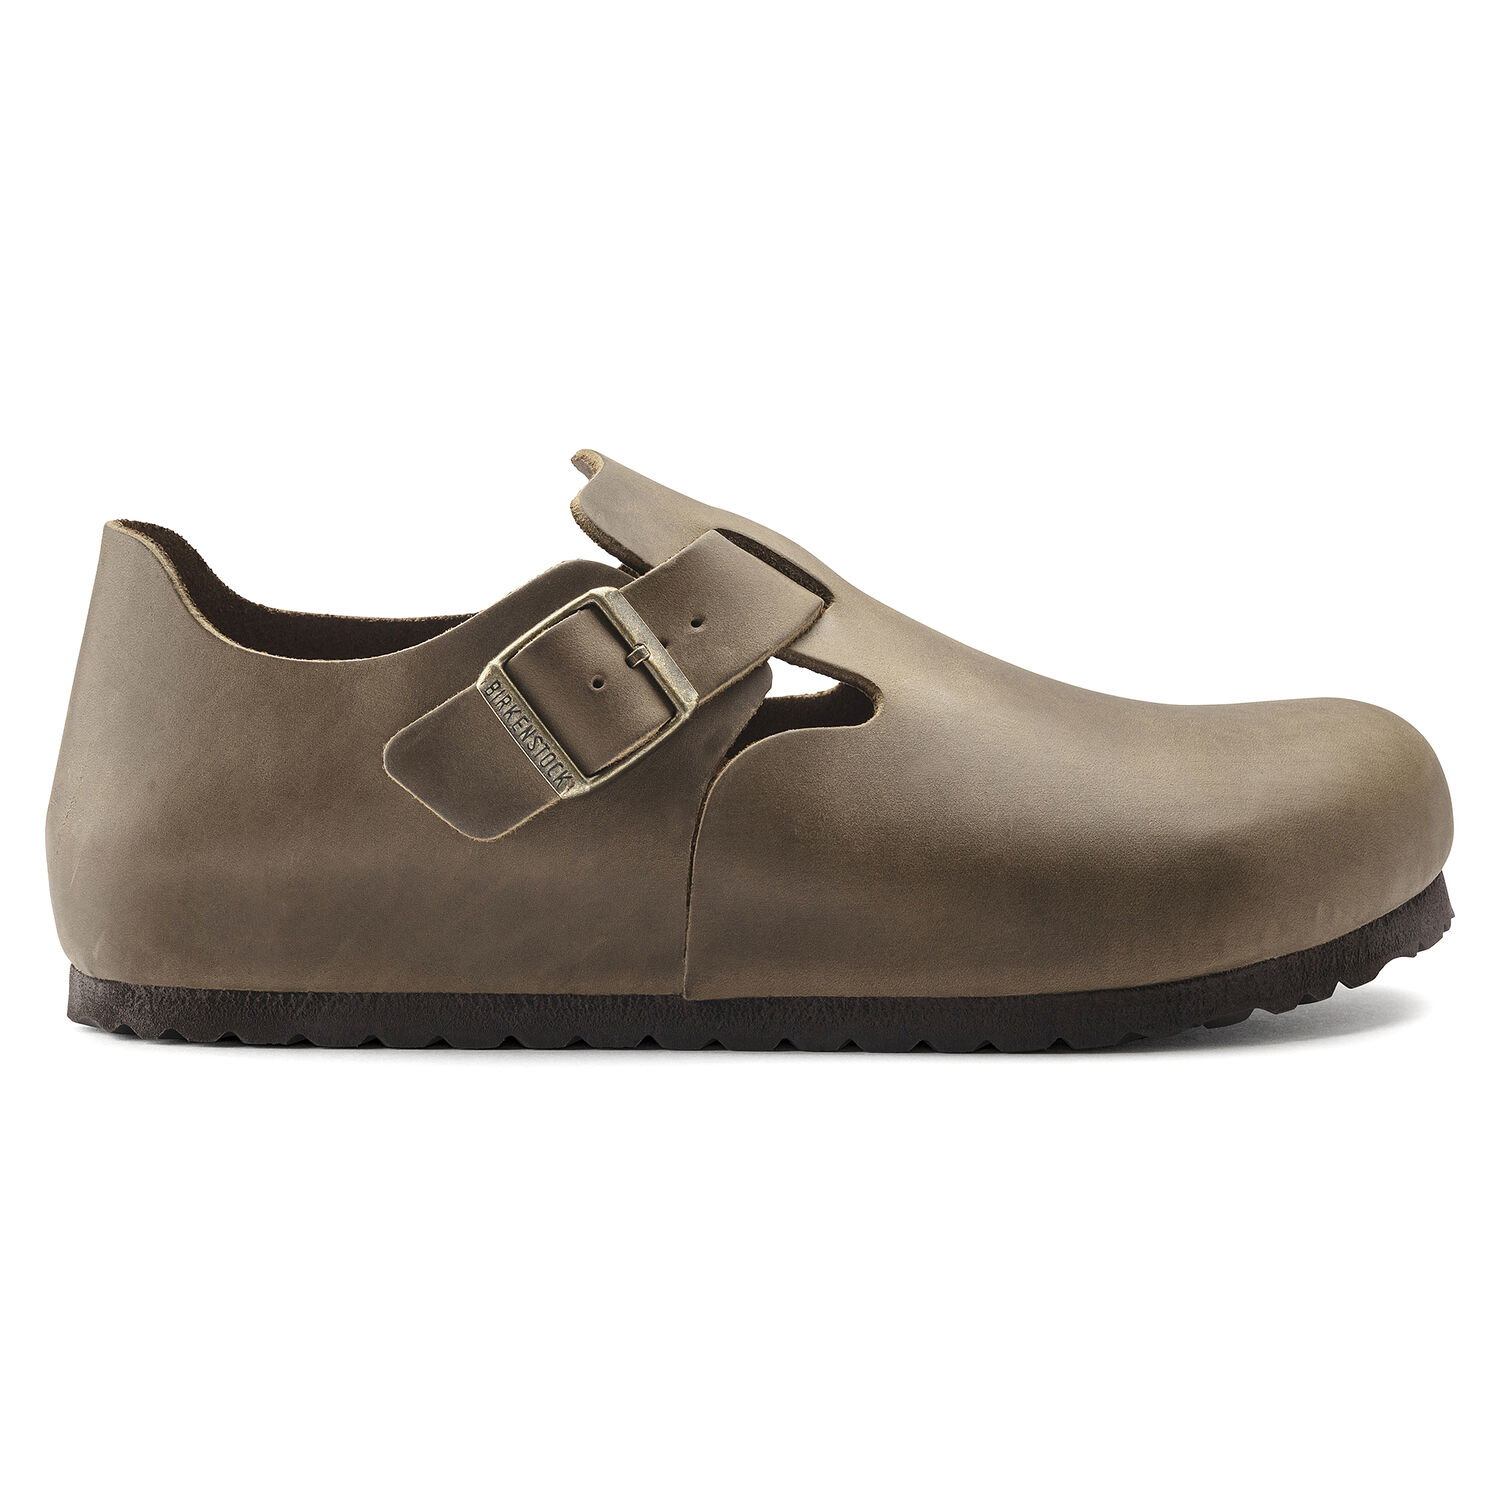 London Oiled Leather Faded Khaki | shop online at BIRKENSTOCK